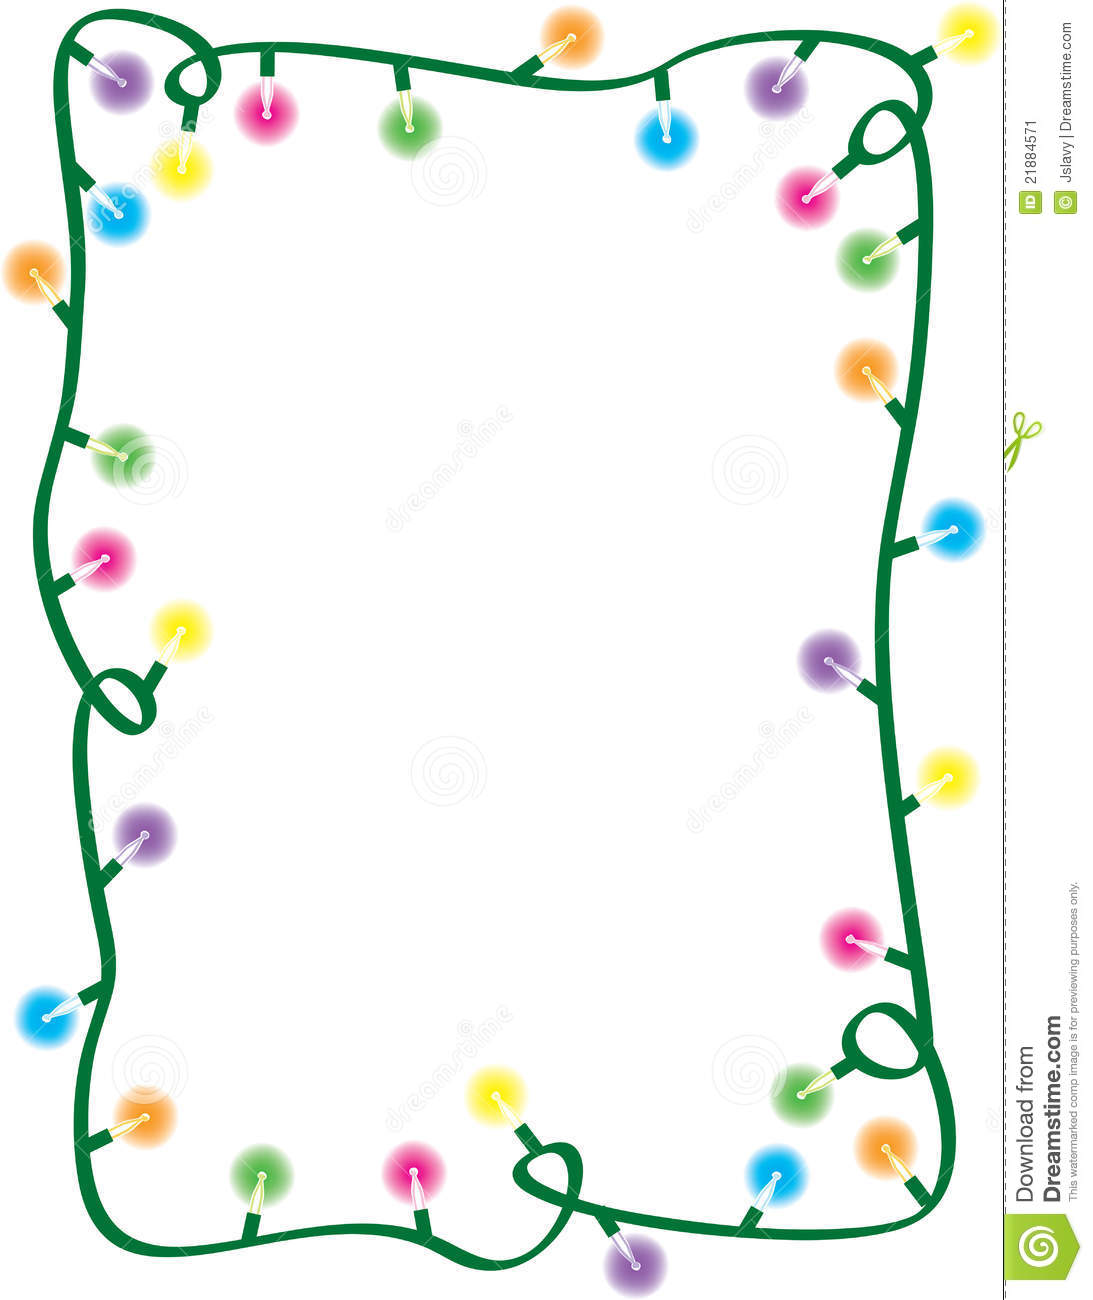 String Of Christmas Lights Clipart For   String Of Christmas